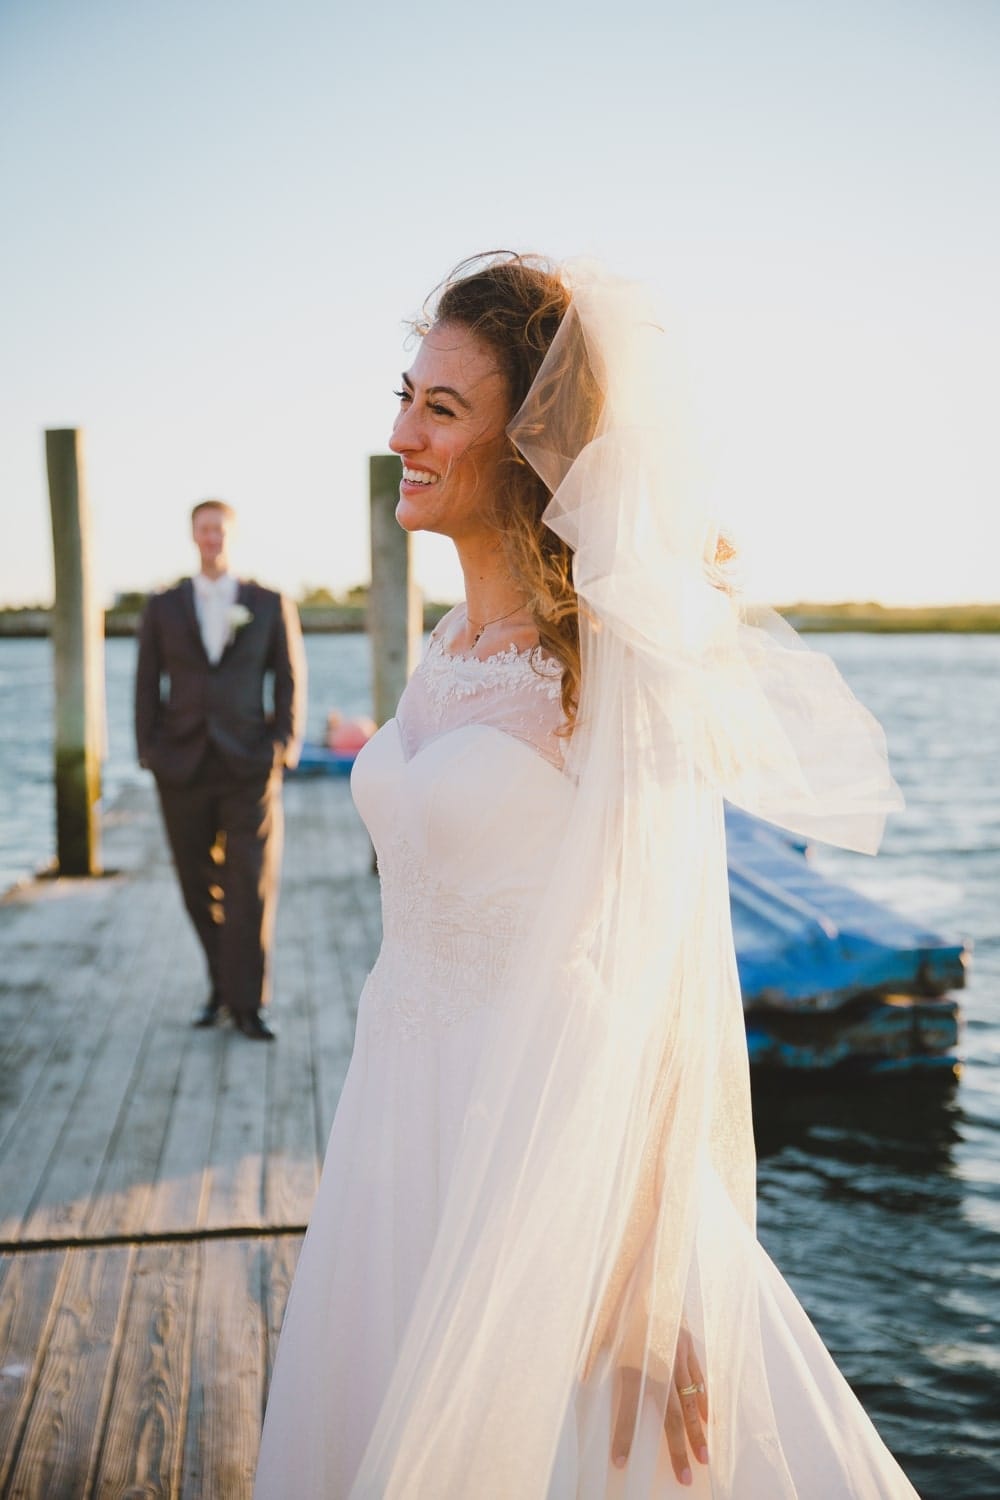 A natural portrait of a bride and groom during their summer wedding on Cape Cod